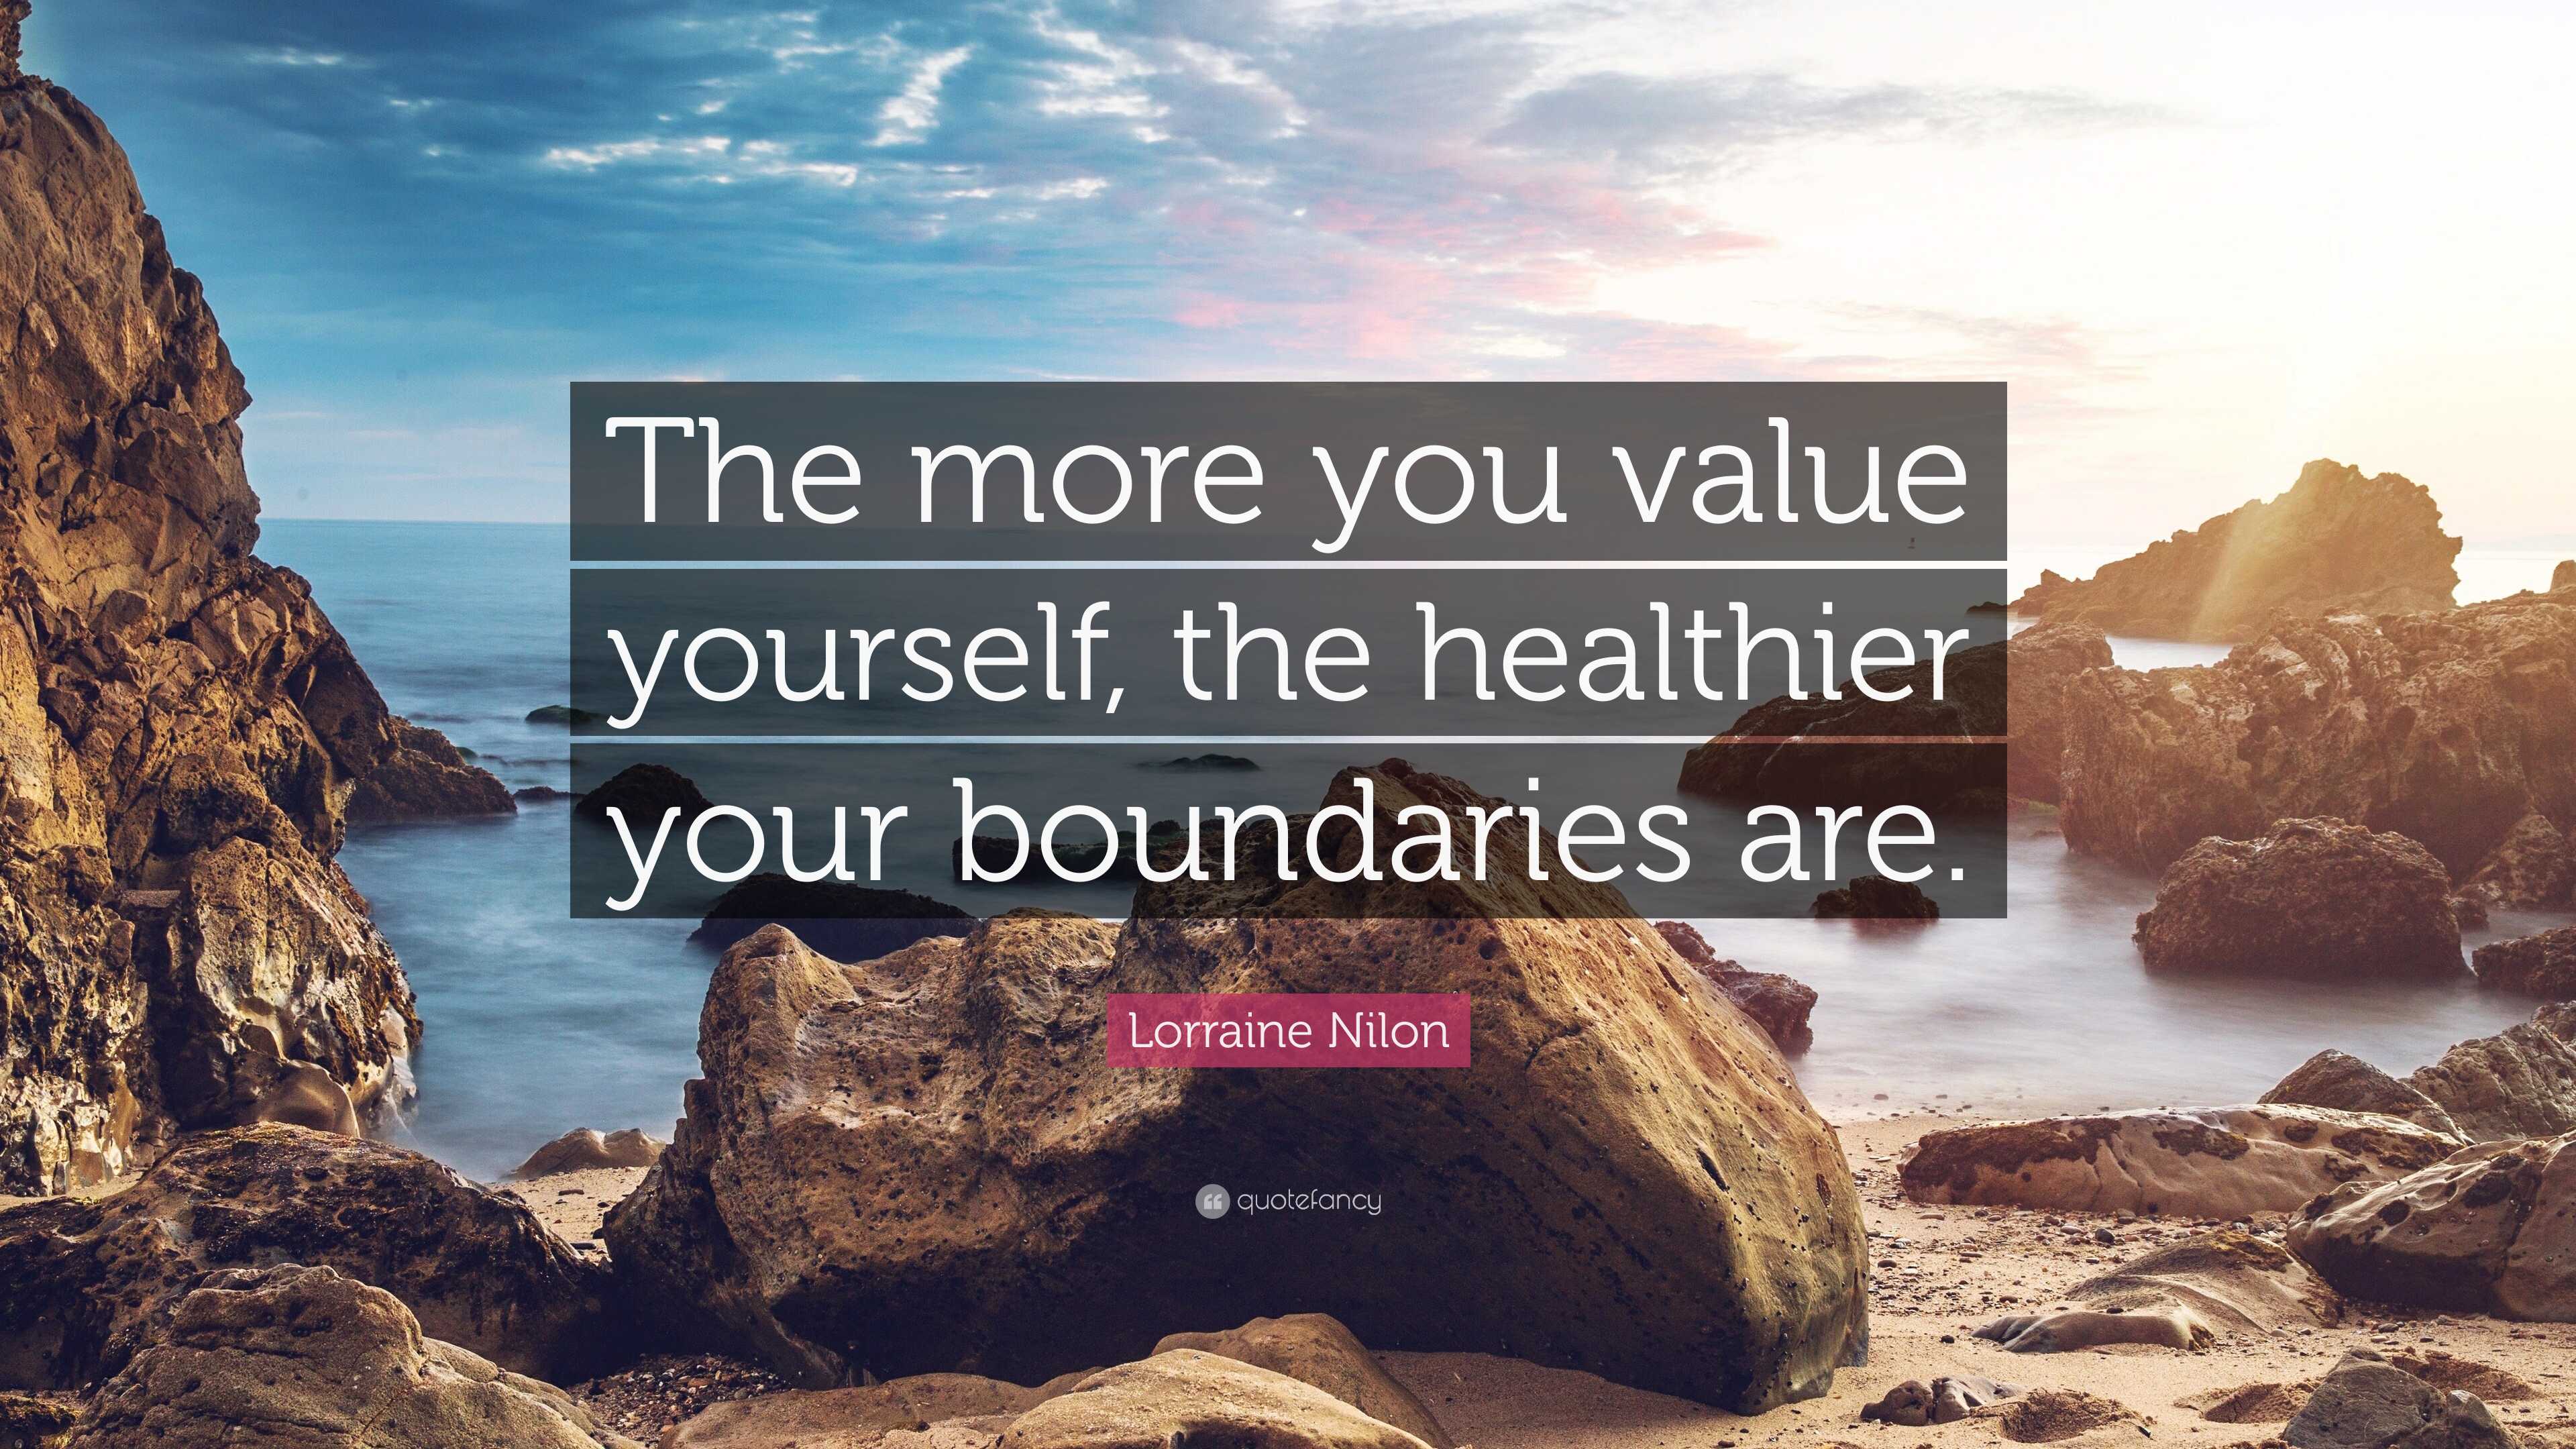 https://quotefancy.com/media/wallpaper/3840x2160/7844809-Lorraine-Nilon-Quote-The-more-you-value-yourself-the-healthier.jpg